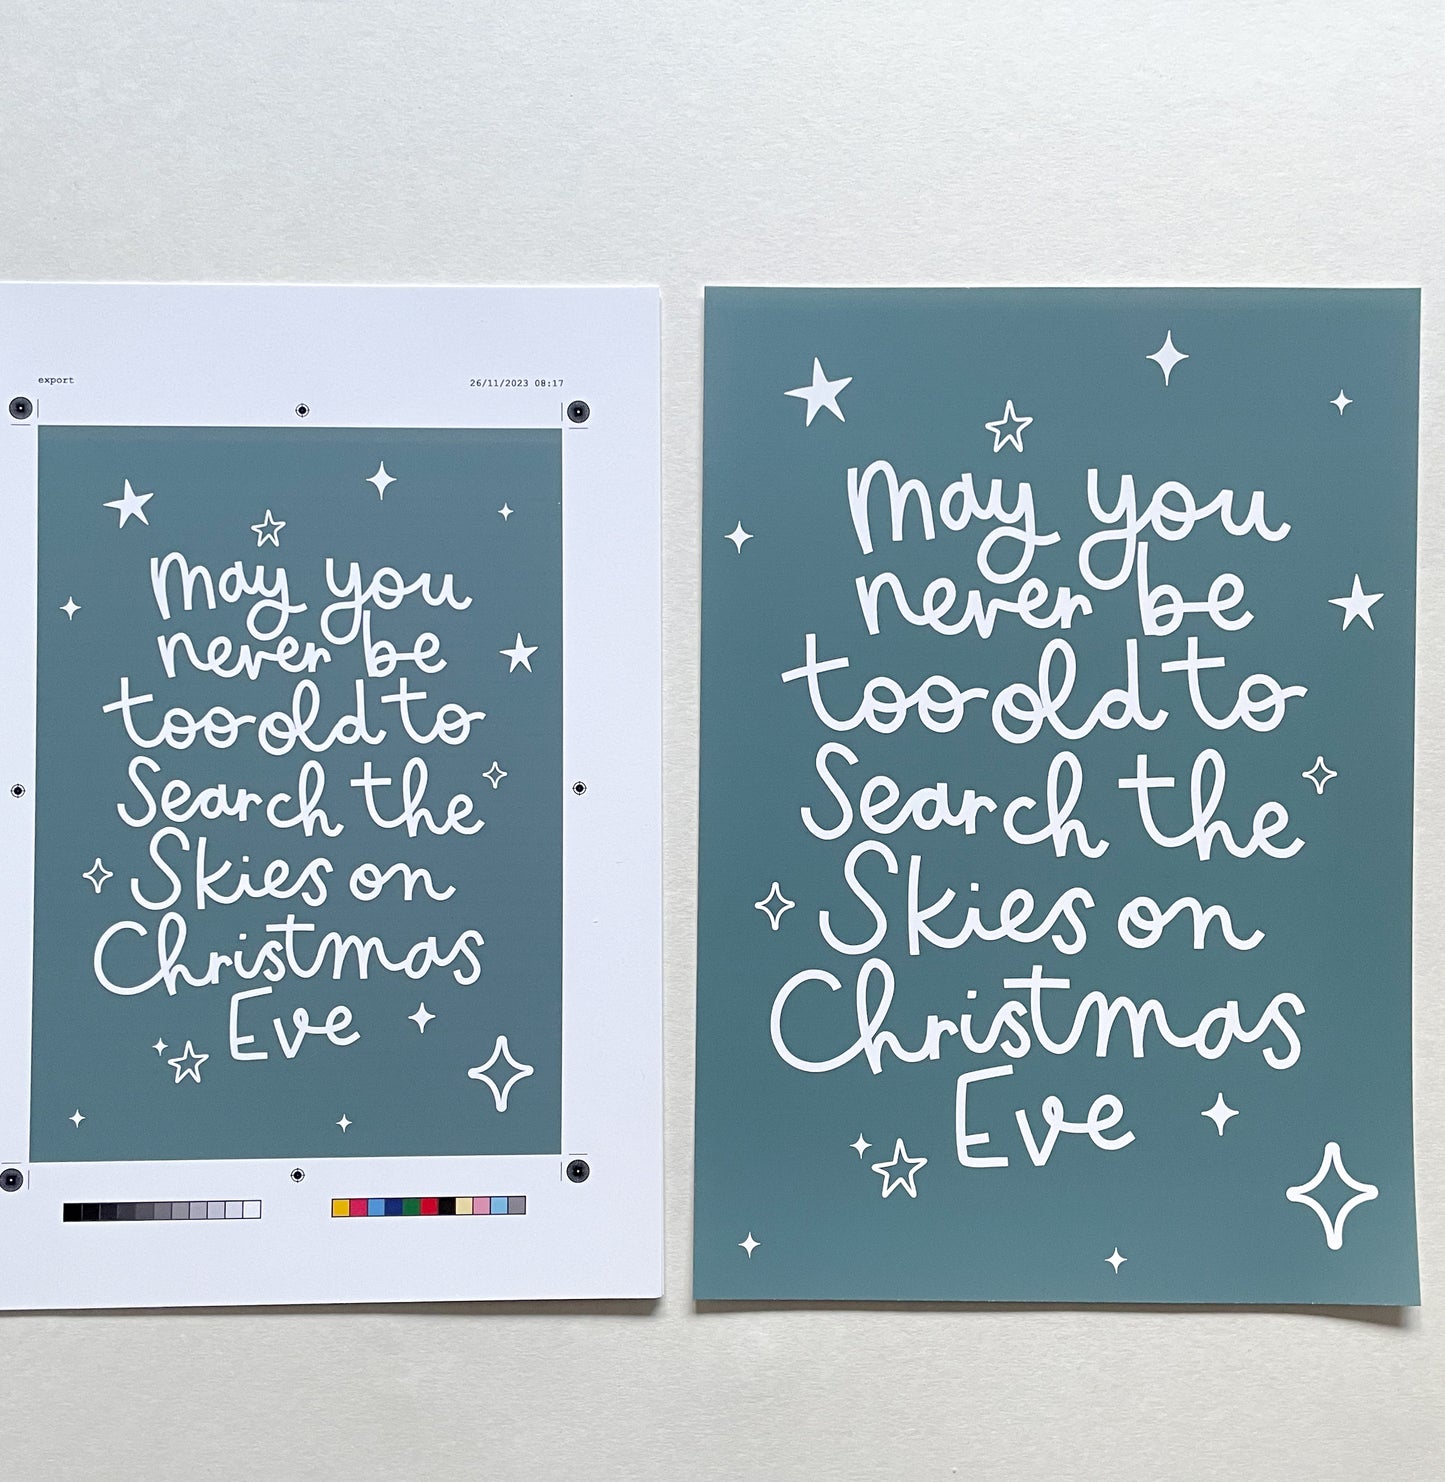 Christmas eve quote print Sample Sale - A5, A4 teal